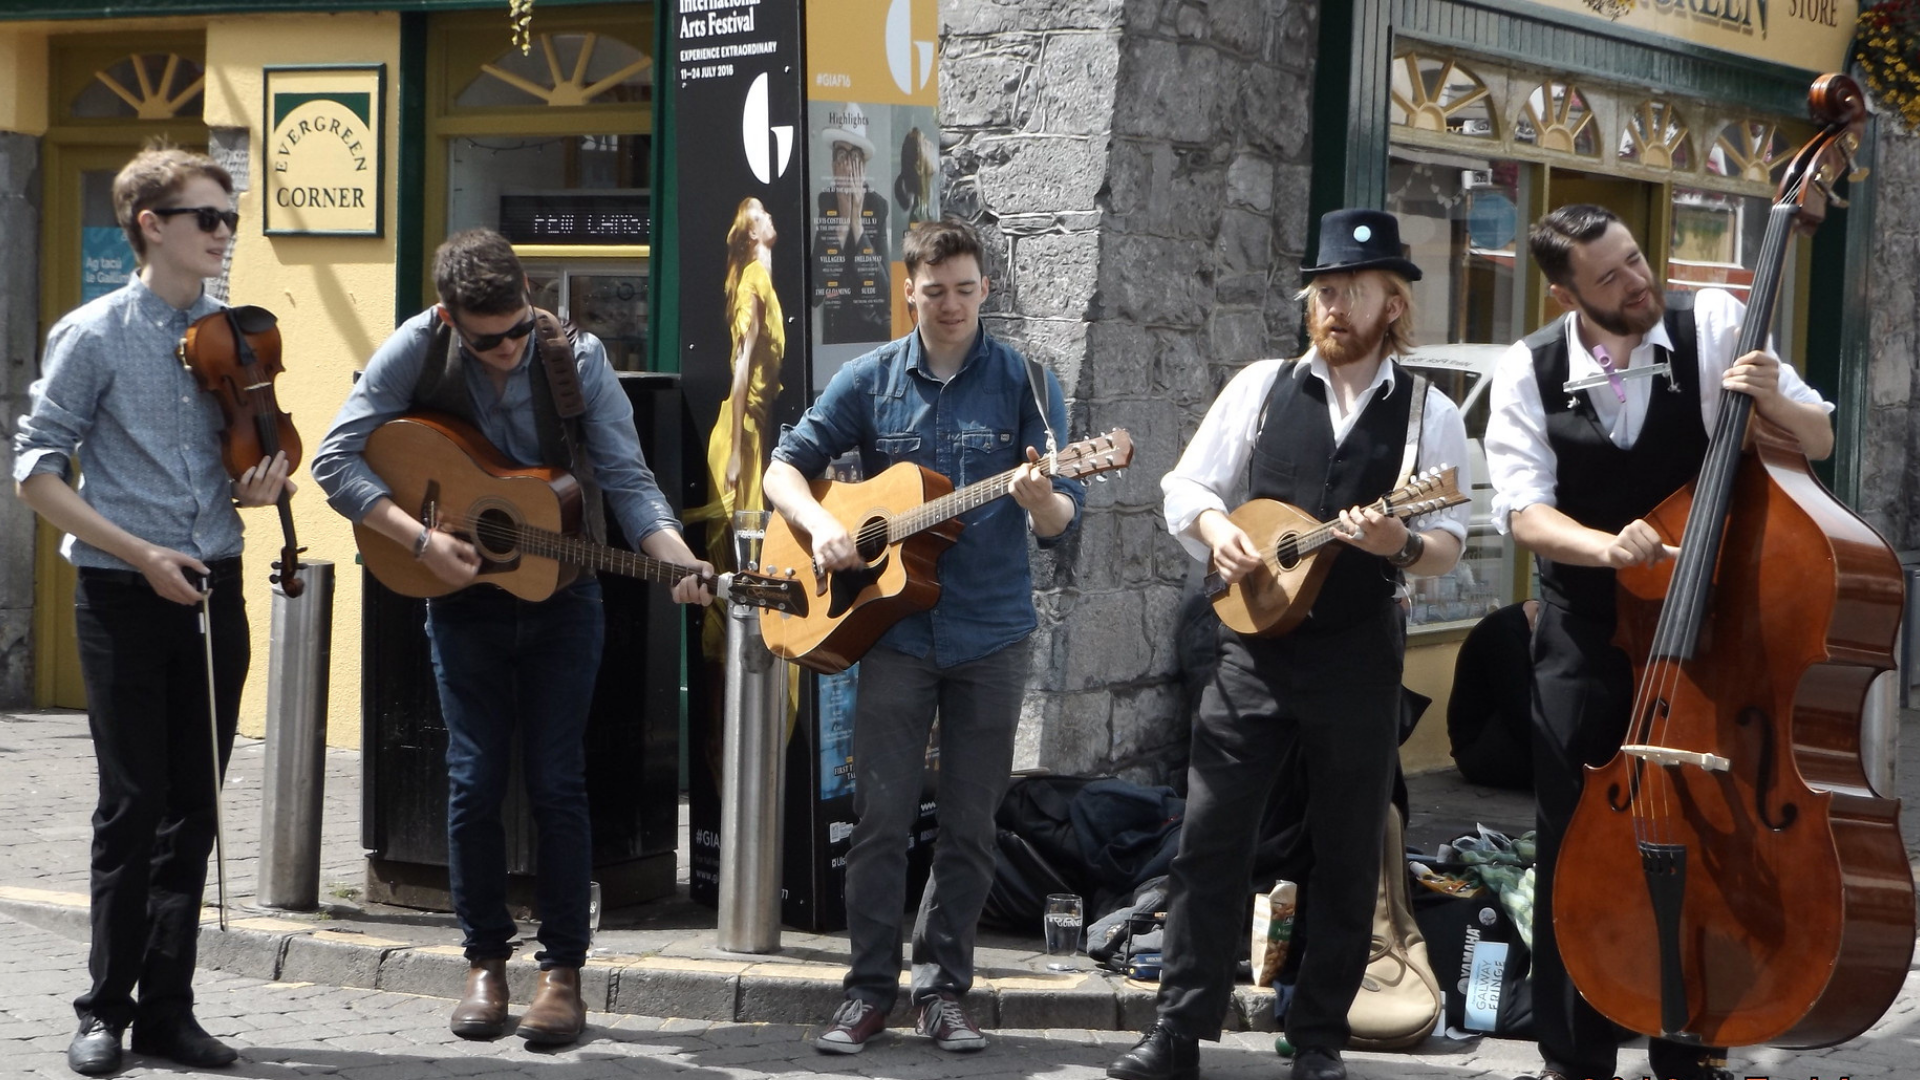 Musicians playing on the streets of Ireland.